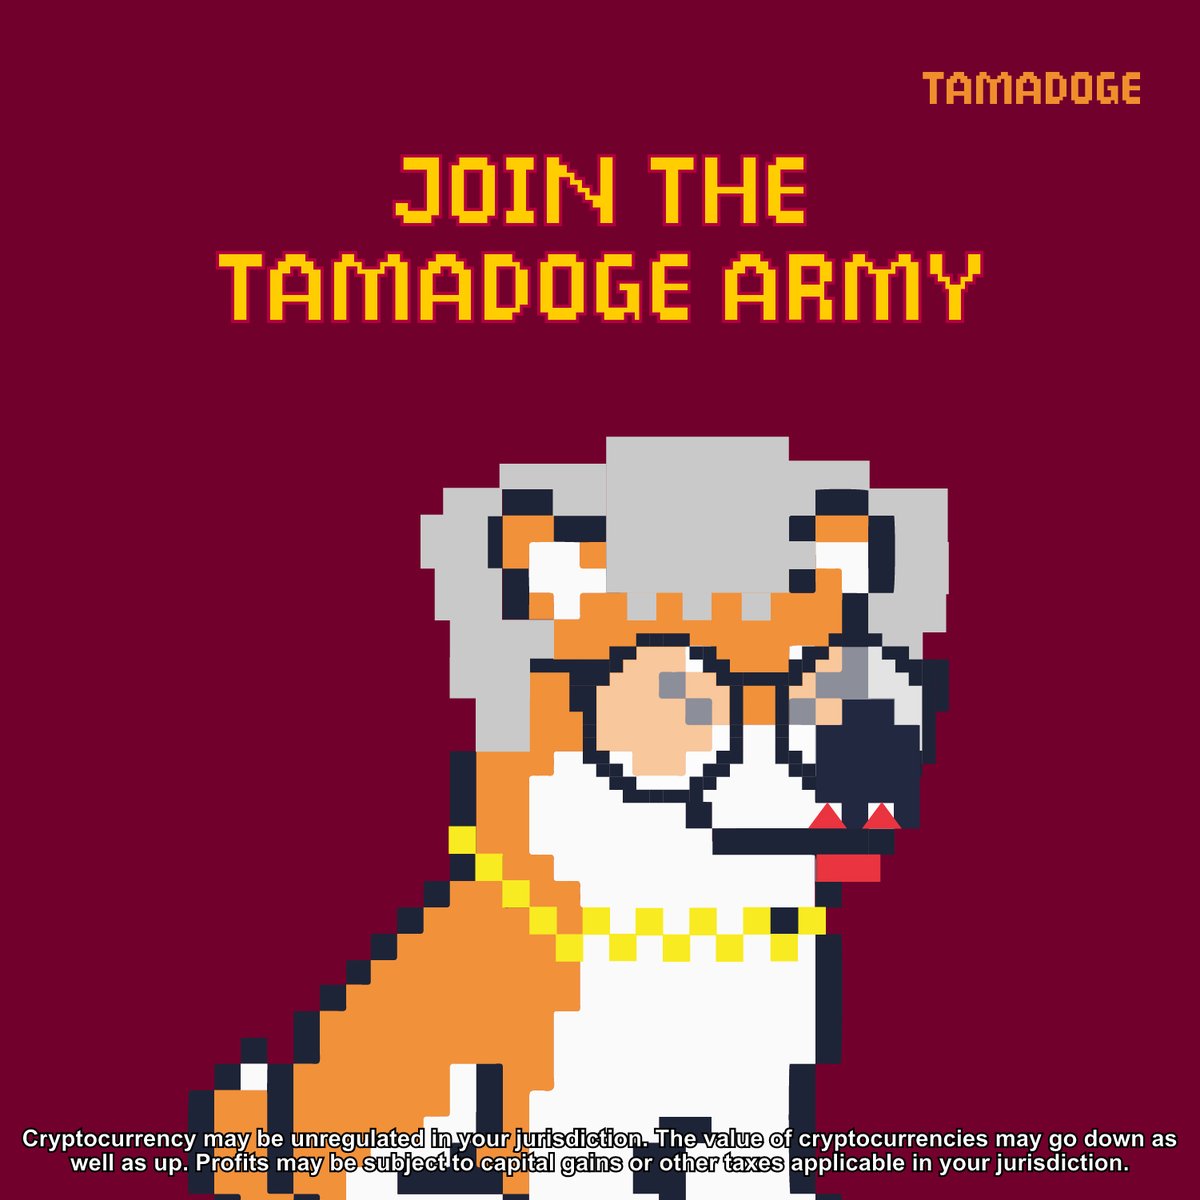 #Tamadoge Is Using The Latest NFT Technology And Standards To Bring You A Token That Can Inject Life Into The Tamadoge Pets. We Want To Make Sure That Your Tamadoge Feels Like As Much A Member Of Your Family As Your Grandma! 👵 GRAB $TAMA NOW! ⬇️ bitesly.io/box_5b9da55c46…